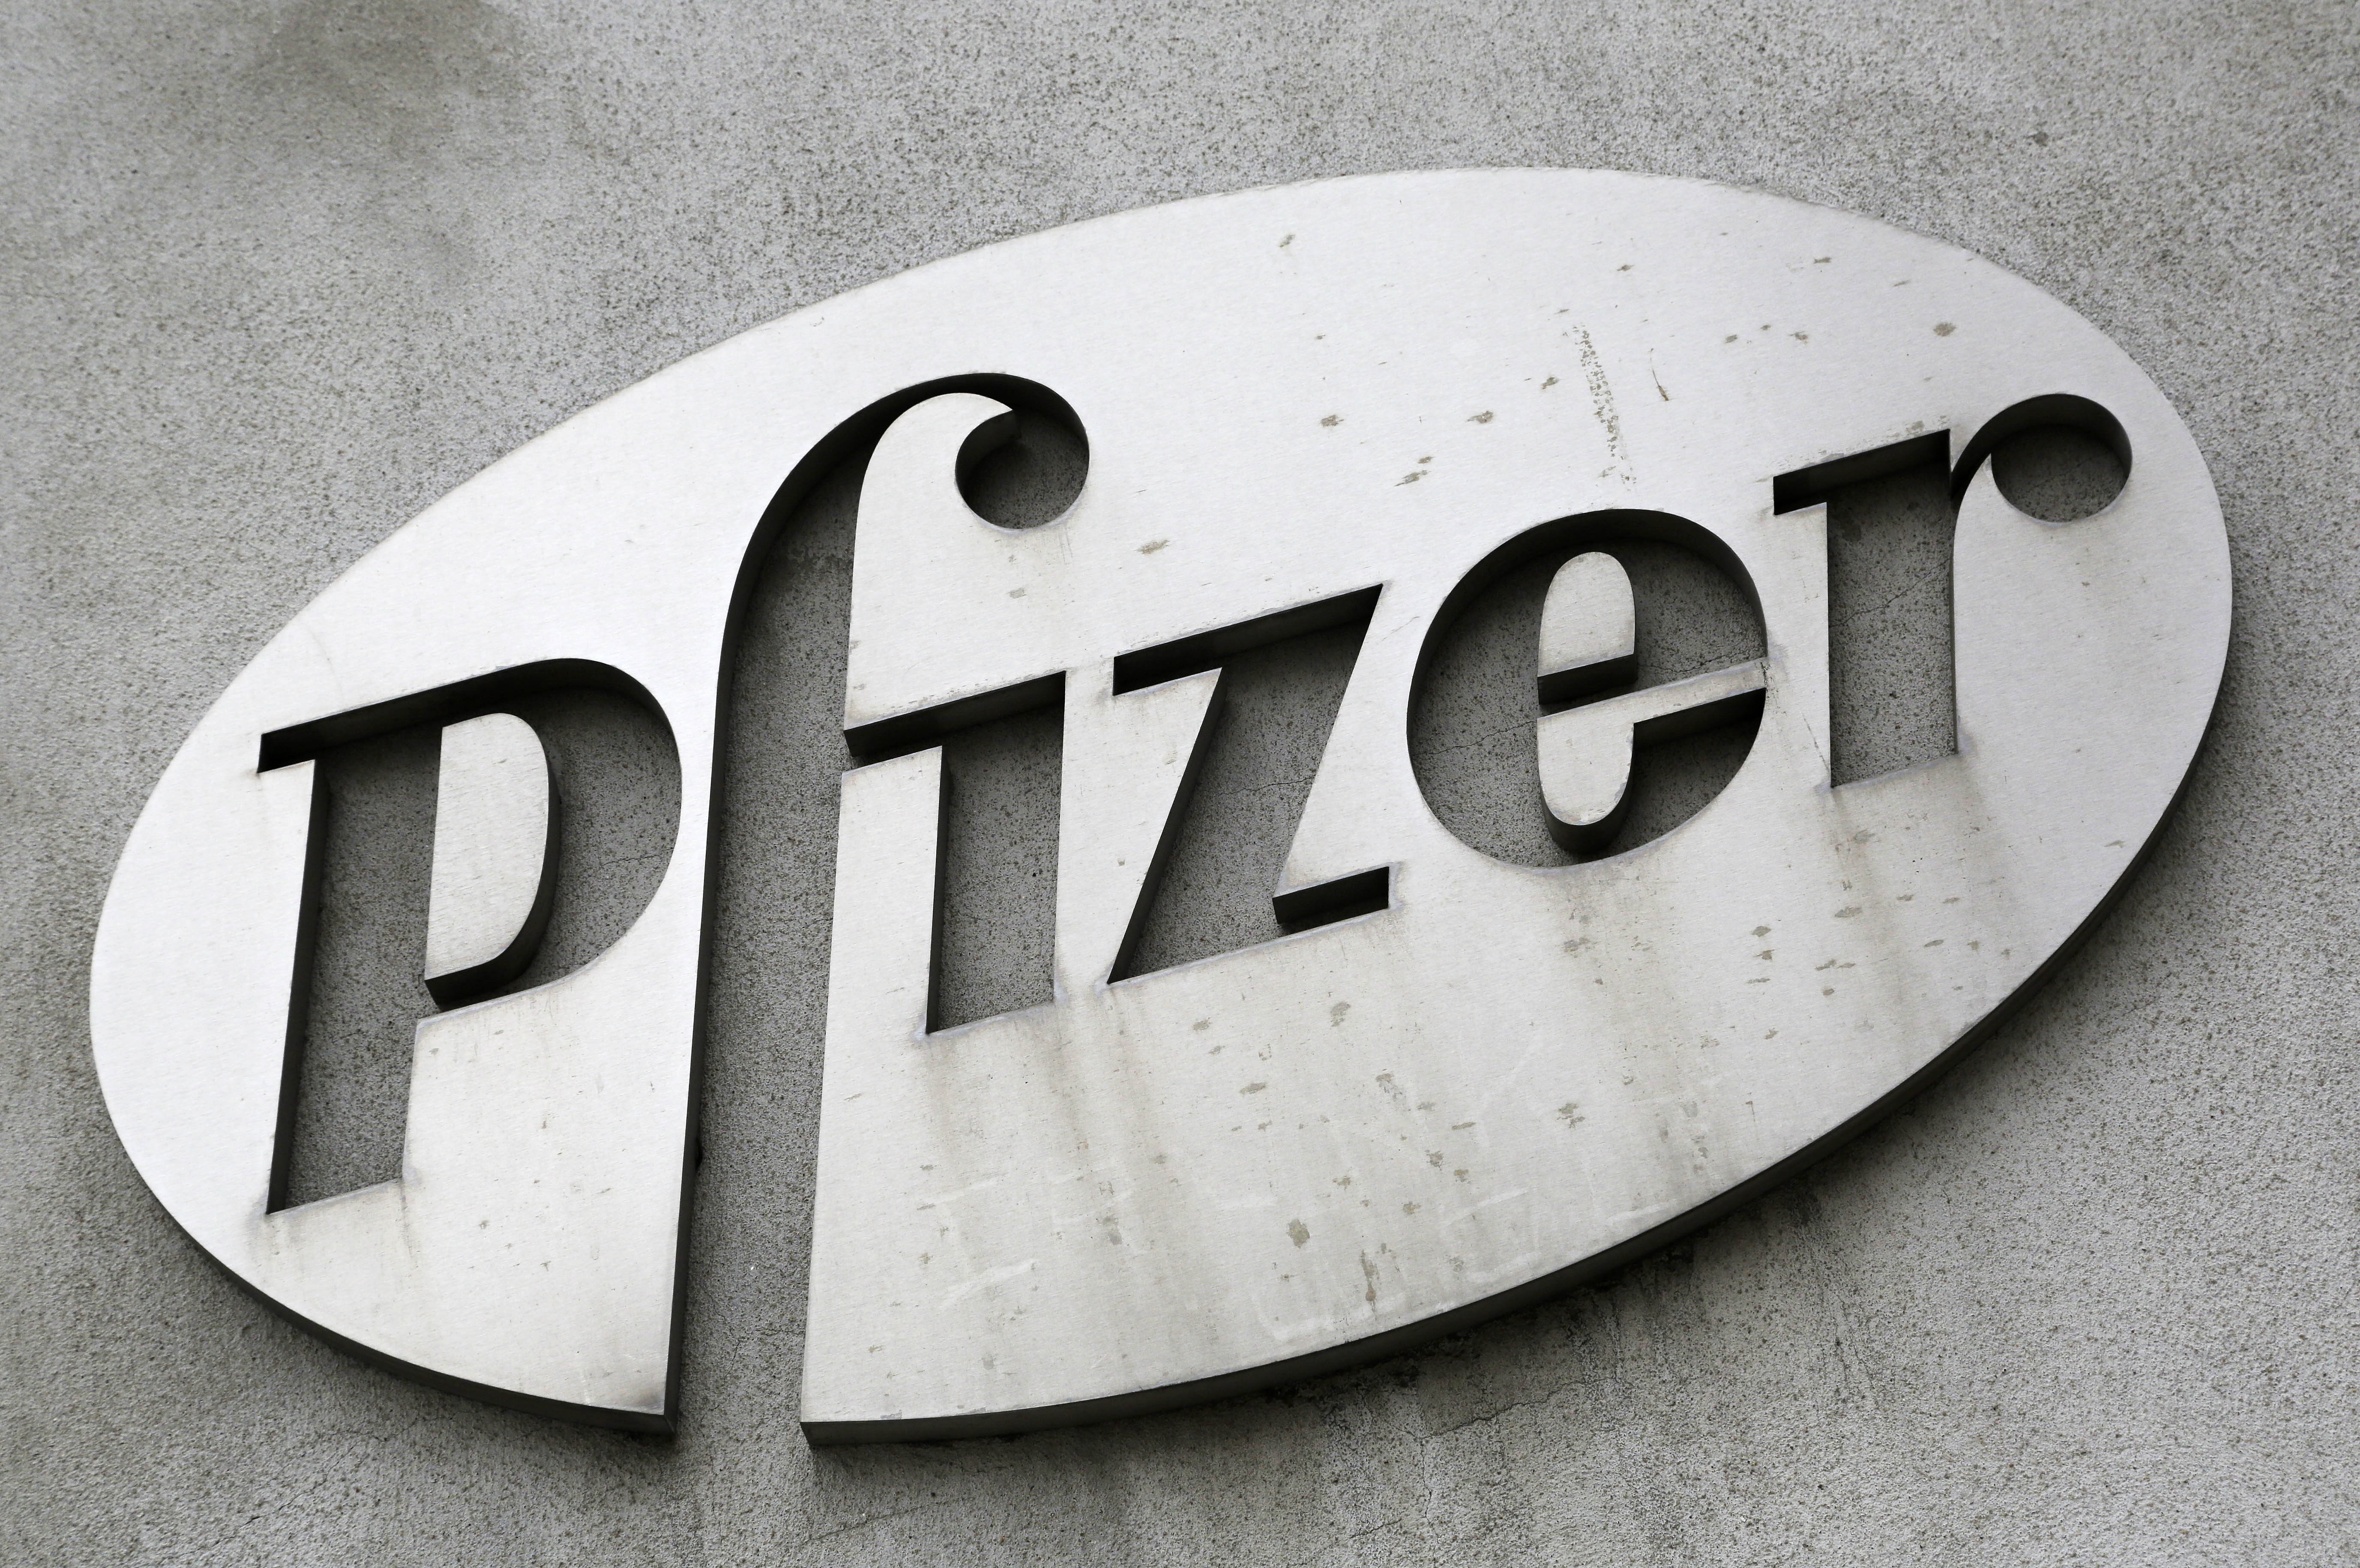 Pfizerlogo Logo - In speed mode, FDA approves Pfizer's new cancer drug early | Fortune